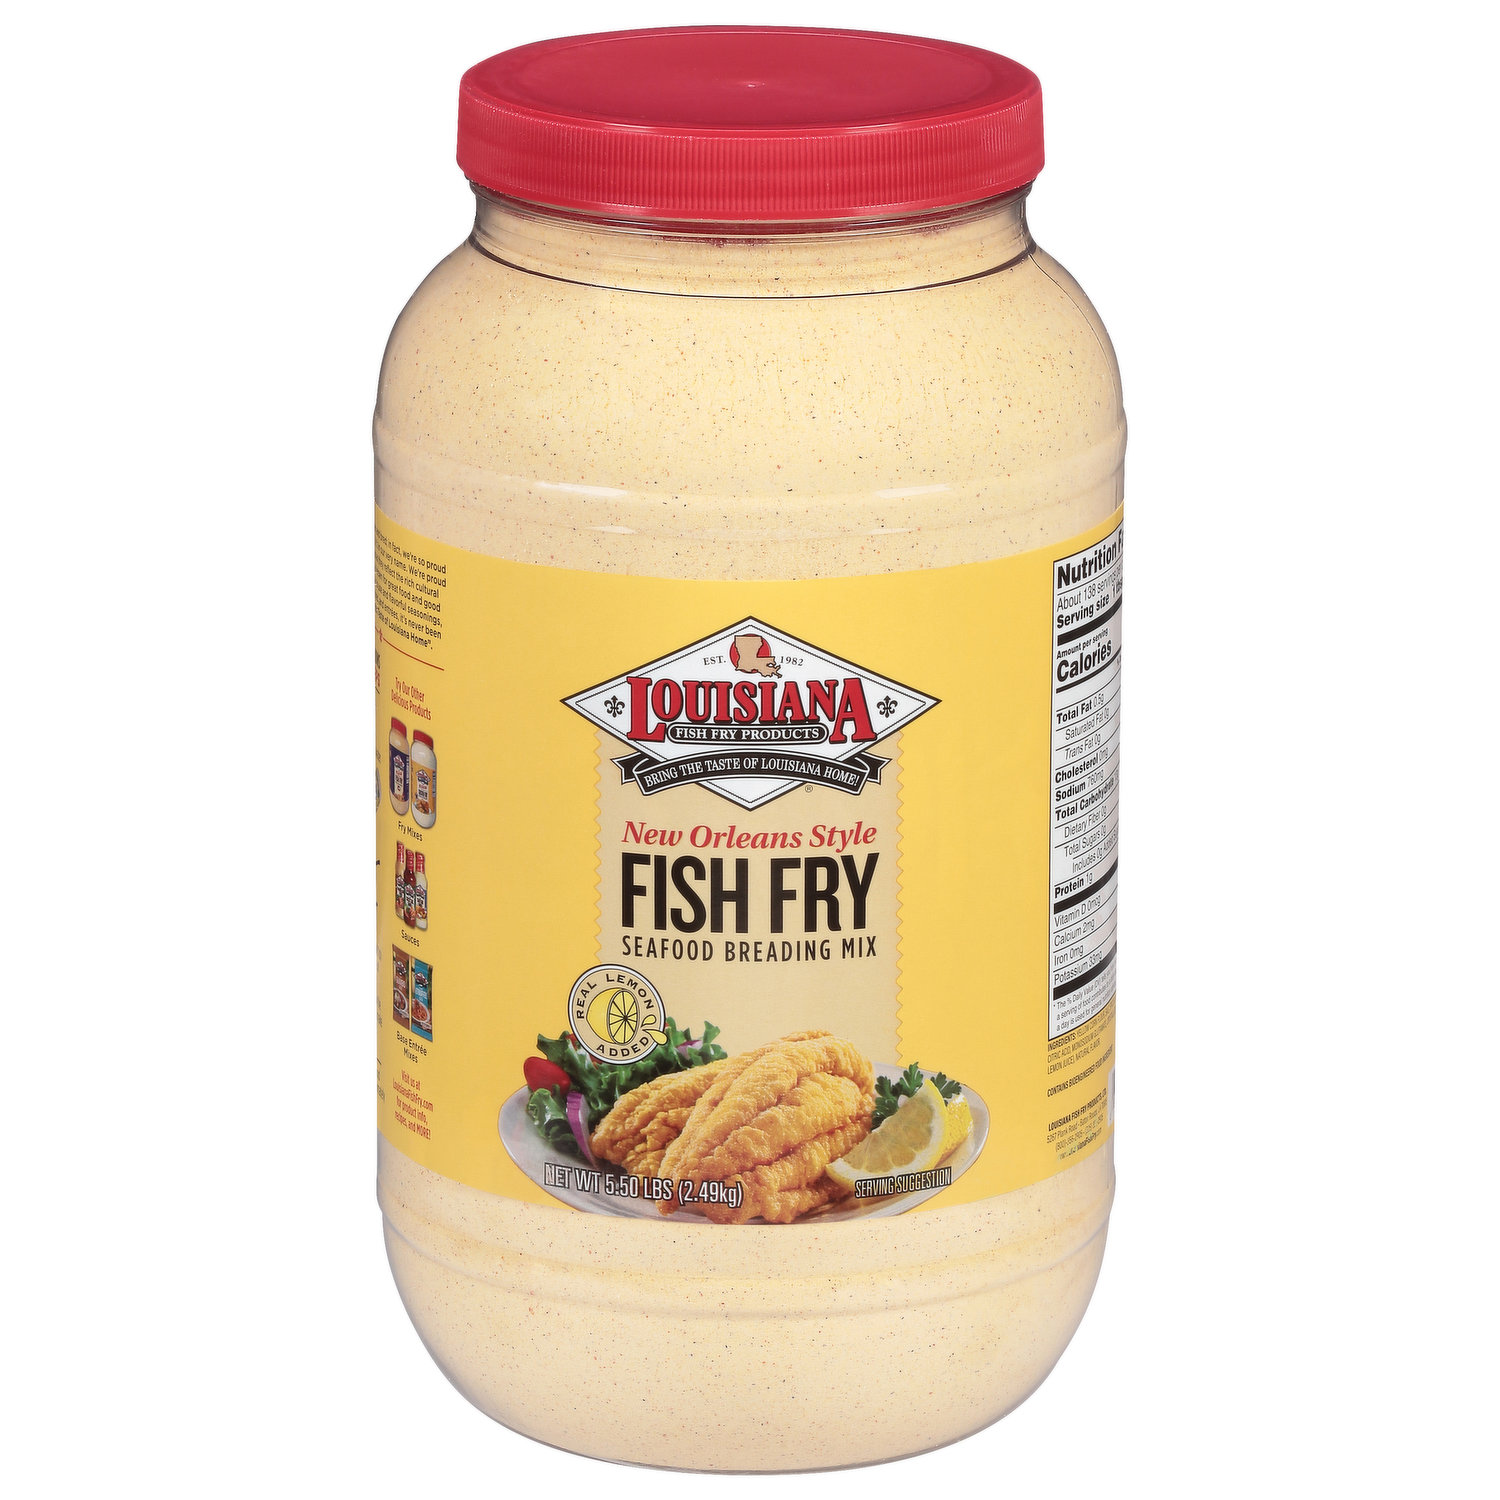 Louisiana Fish Fry Products Seafood Breading Mix, Fish Fry,, 56% OFF